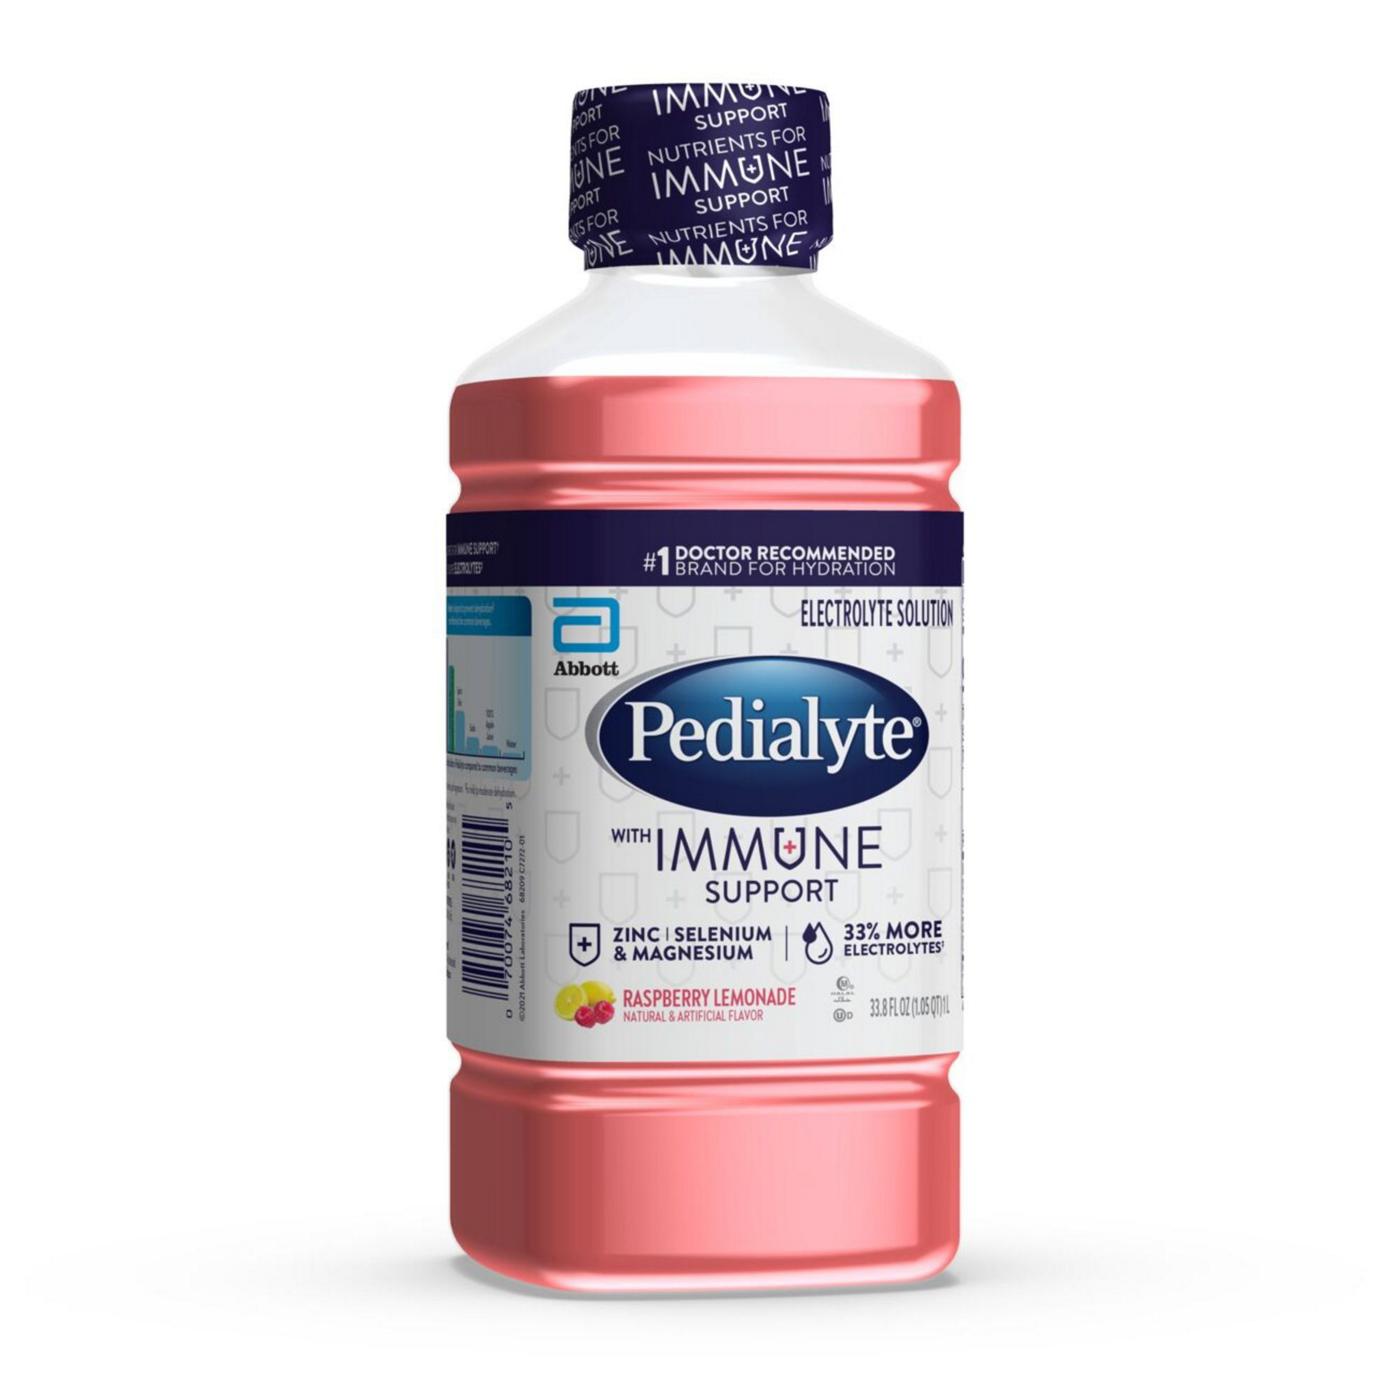 Pedialyte with Immune Support Electrolyte Solution - Raspberry Lemonade; image 6 of 10